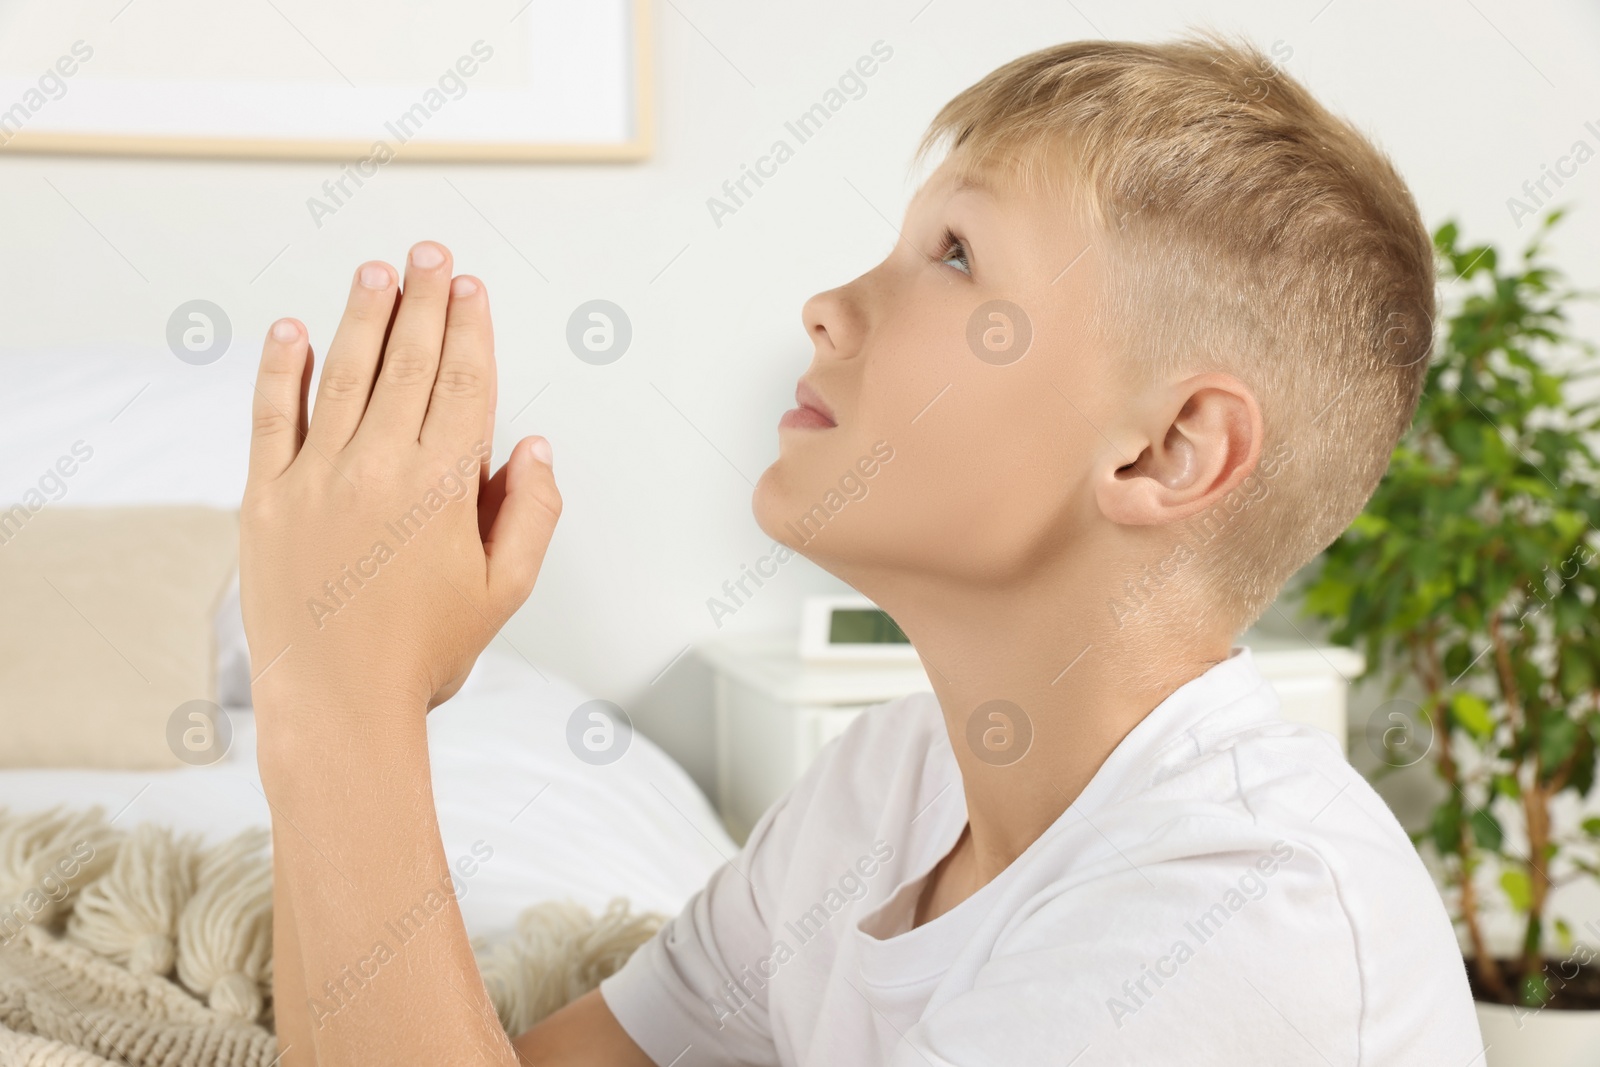 Photo of Boy with clasped hands praying near bed at home